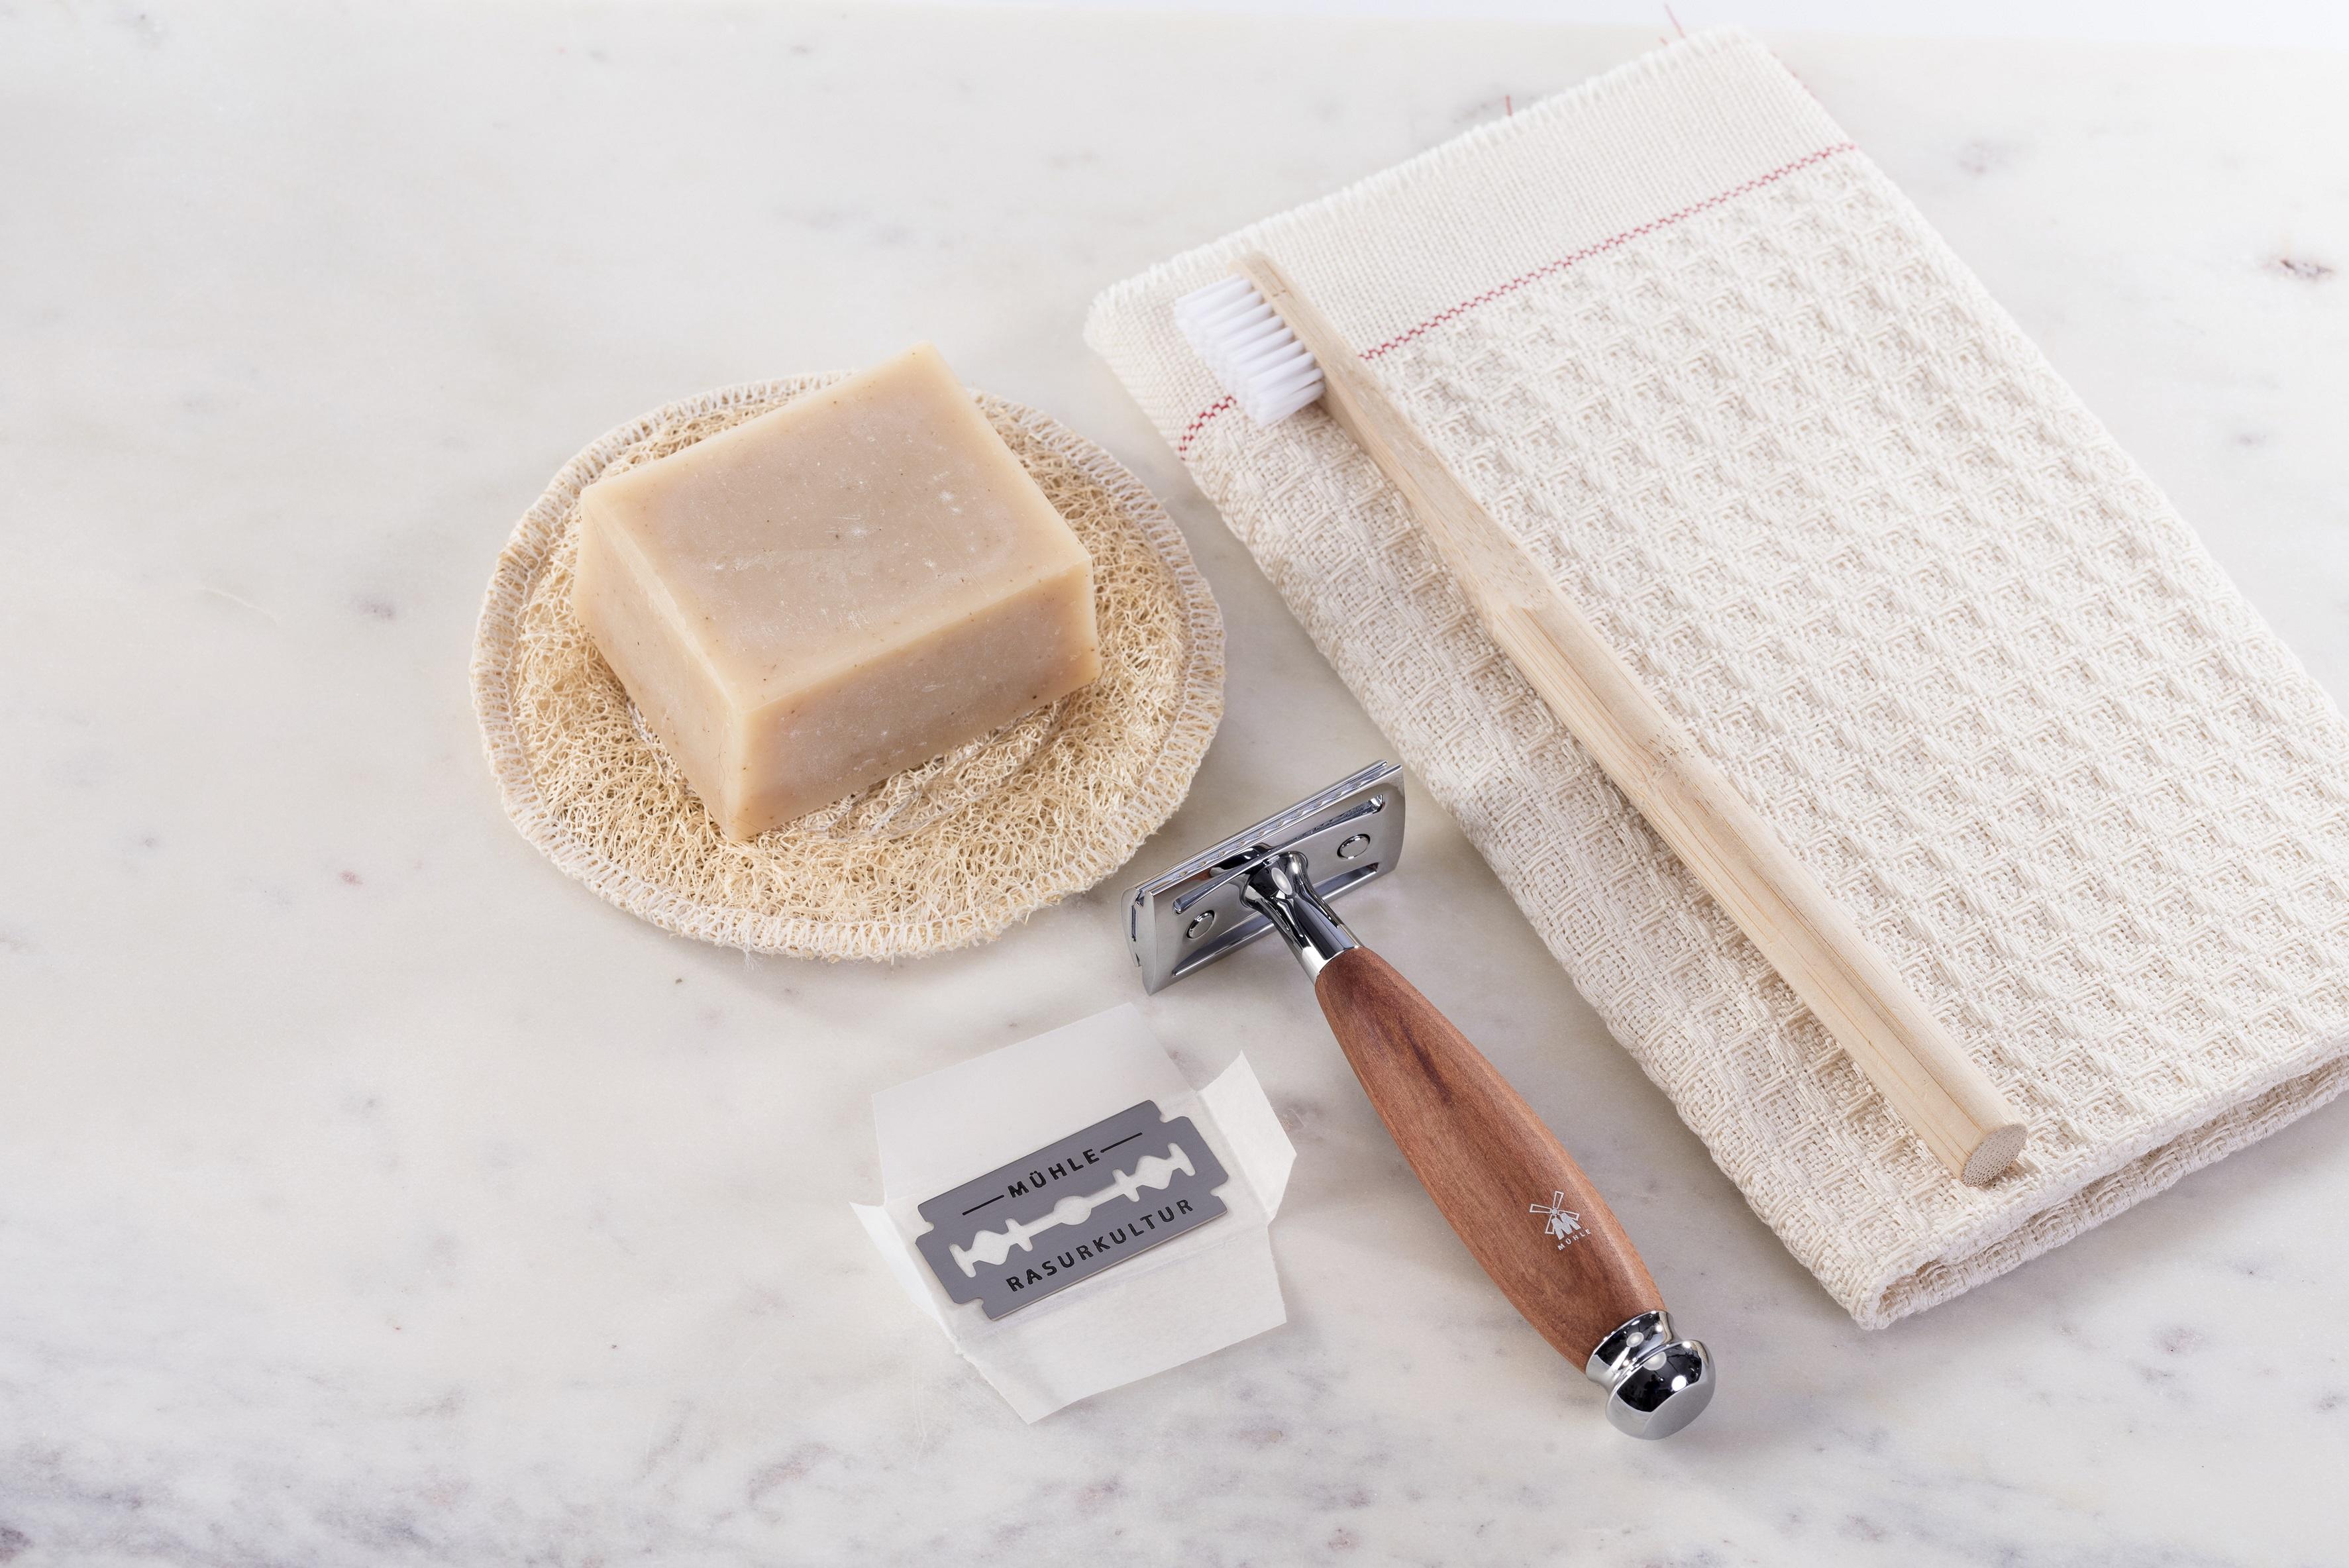 MÜHLE VIVO Plumwood Safety Razor with Blade, Toothbrush, Towel and Soap